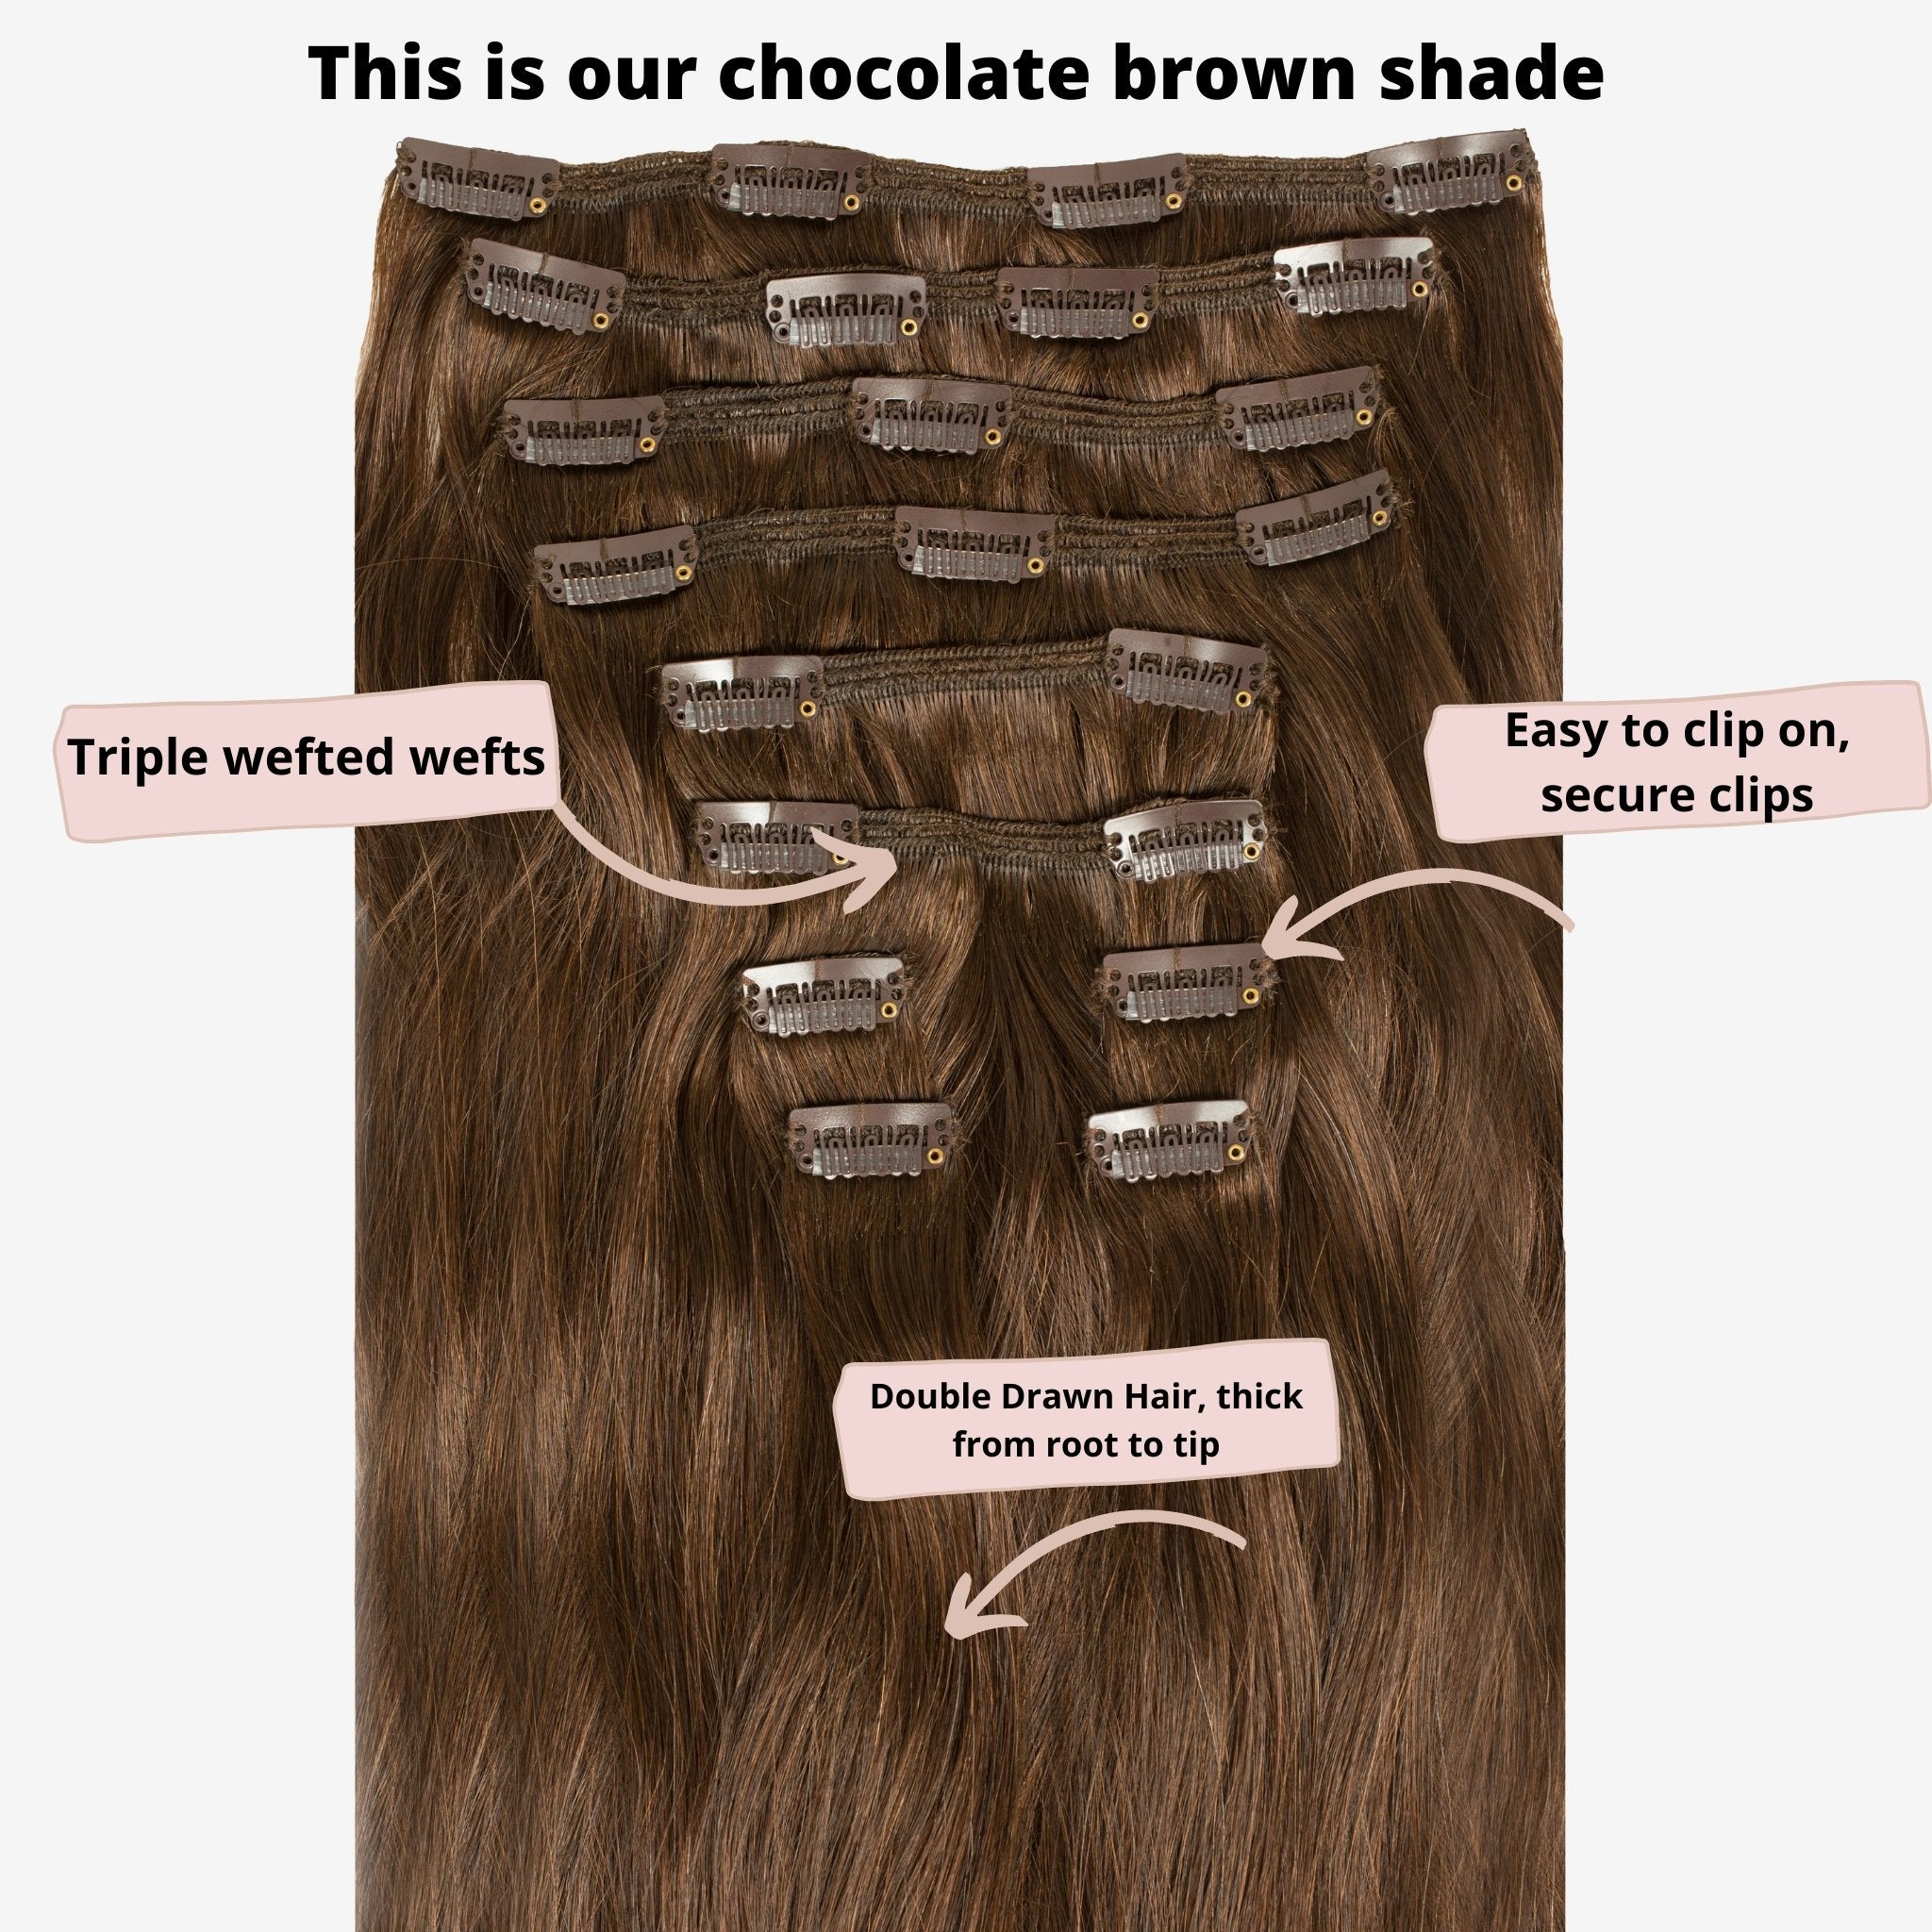 Clip-In Oak Brown Hair Extensions (#5) - Aashi Beauty